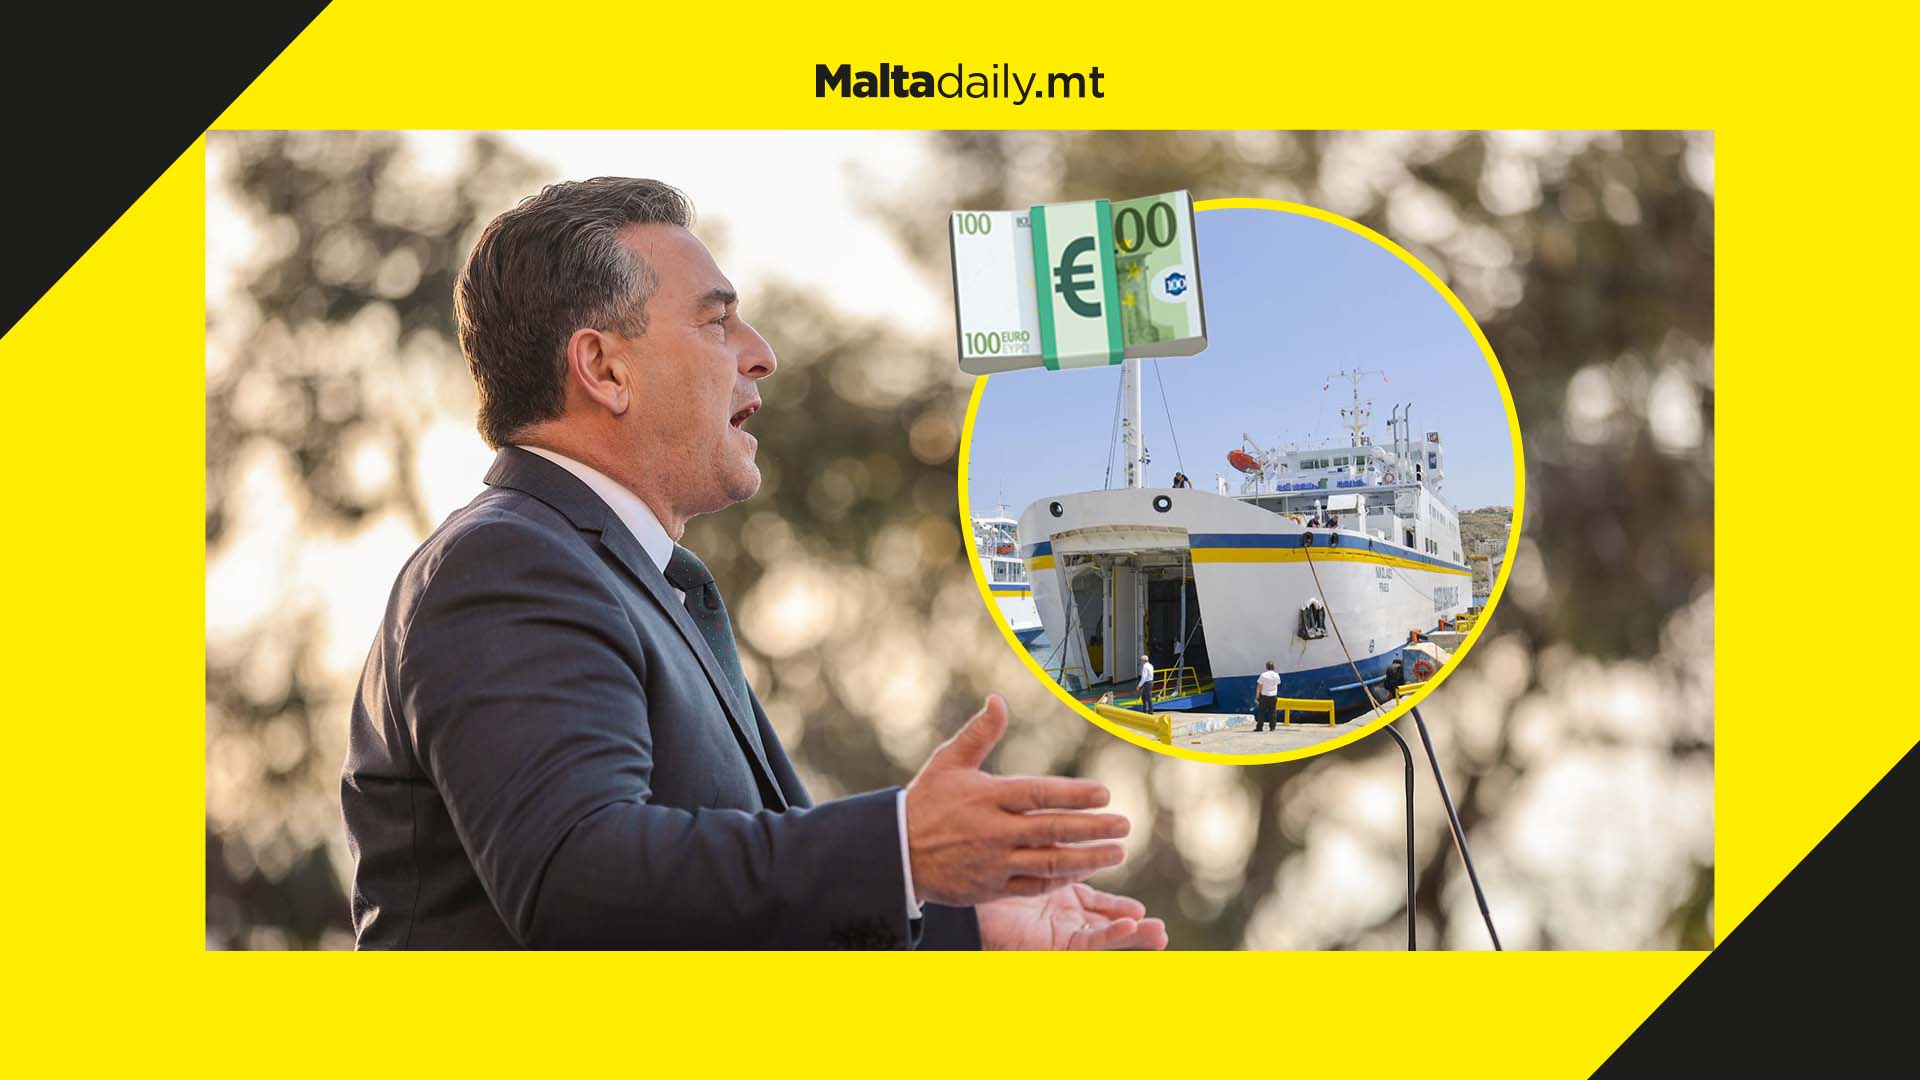 Gozitans workers in Malta should be paid for travelling time, says Bernard Grech